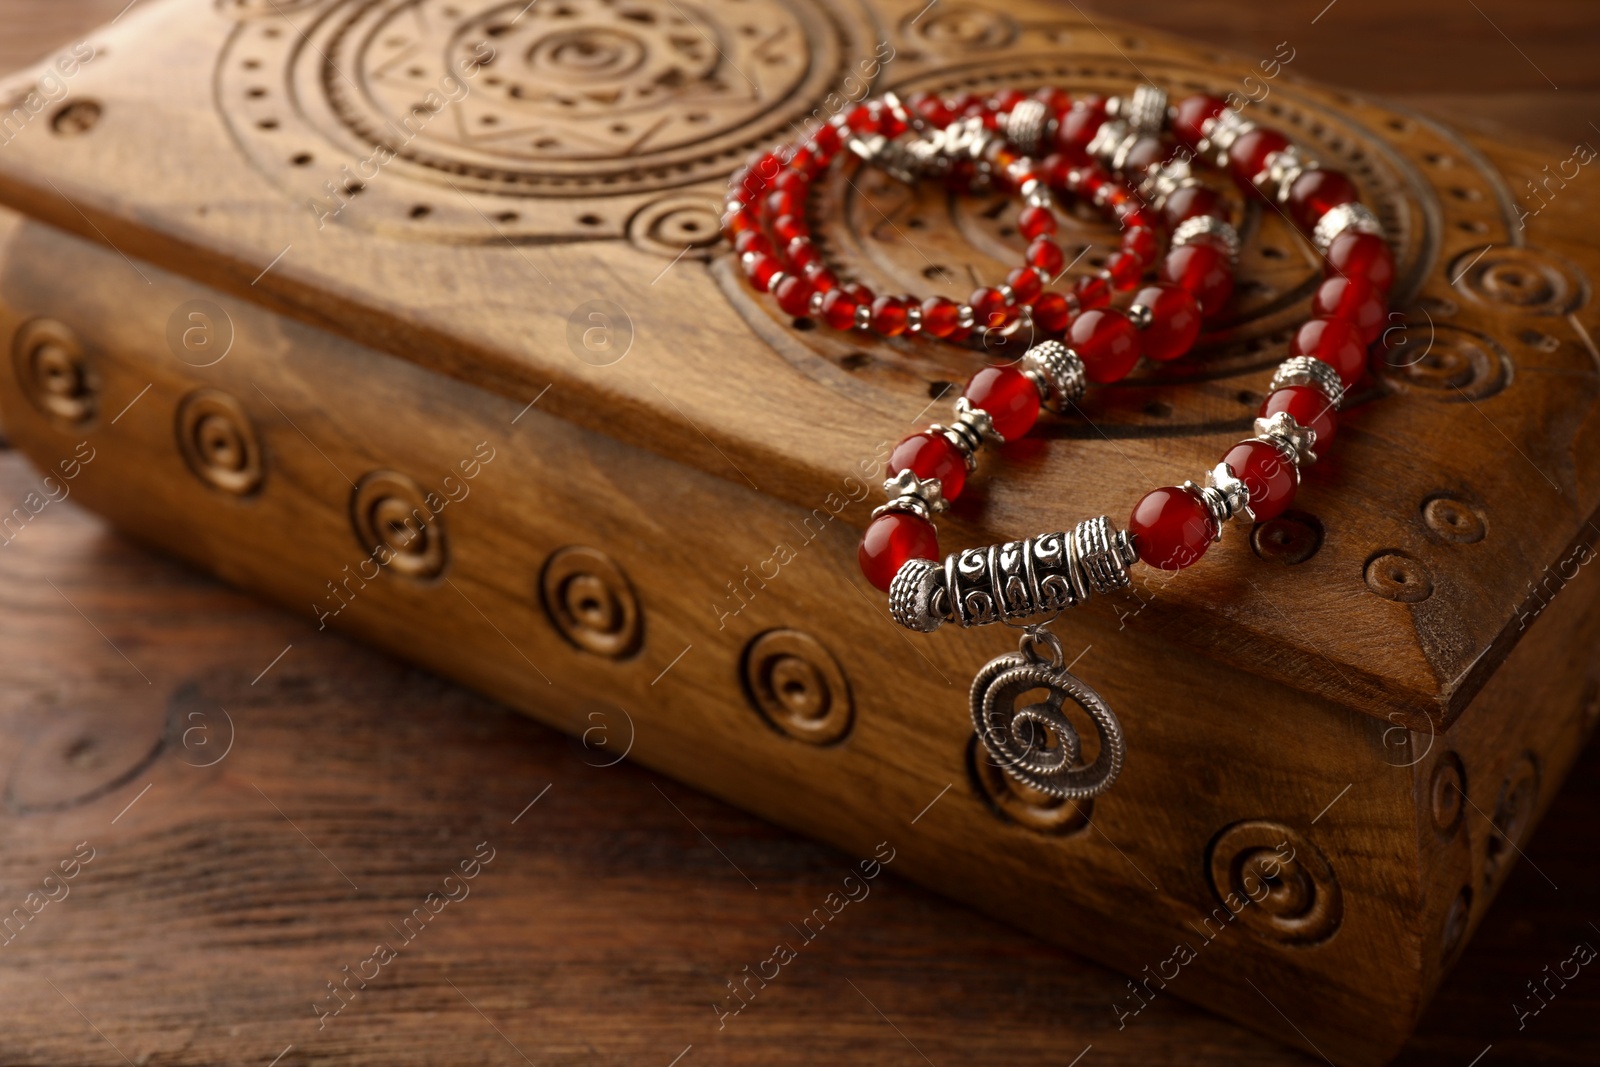 Photo of Beautiful necklace with gemstones and wooden jewelry box on table